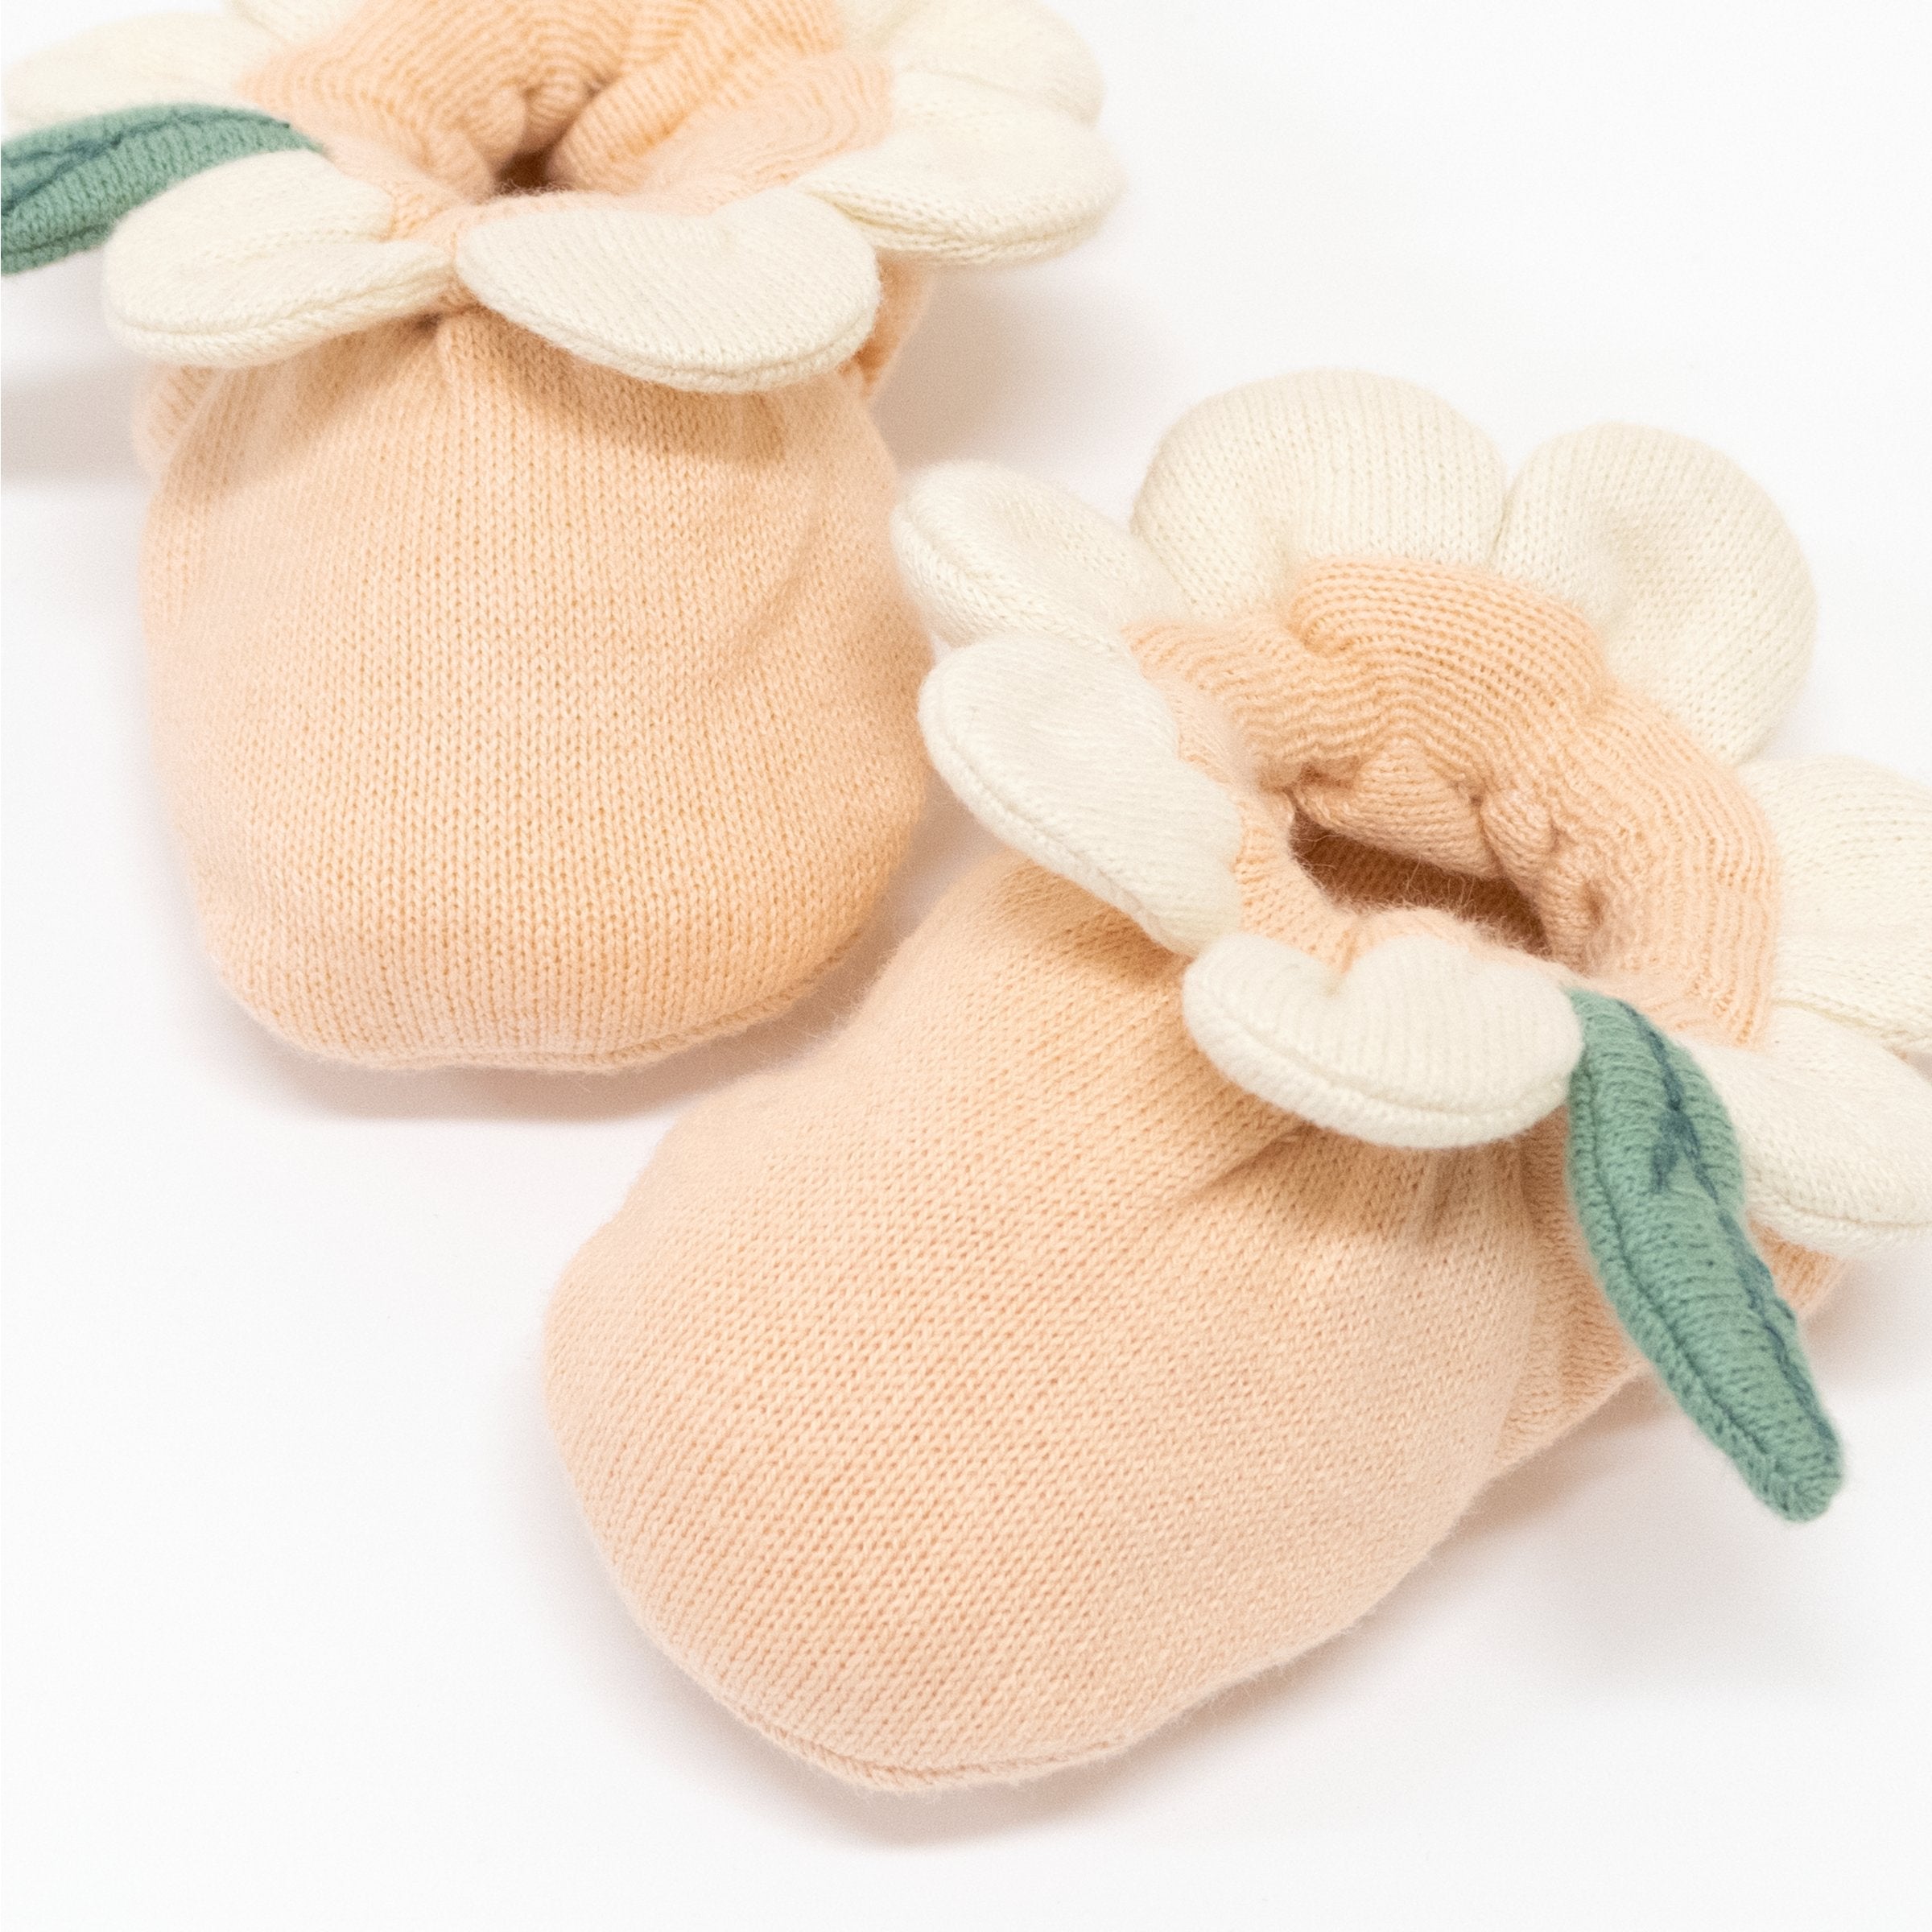 Adorable organic cotton baby clothes and baby rattle with floral details.